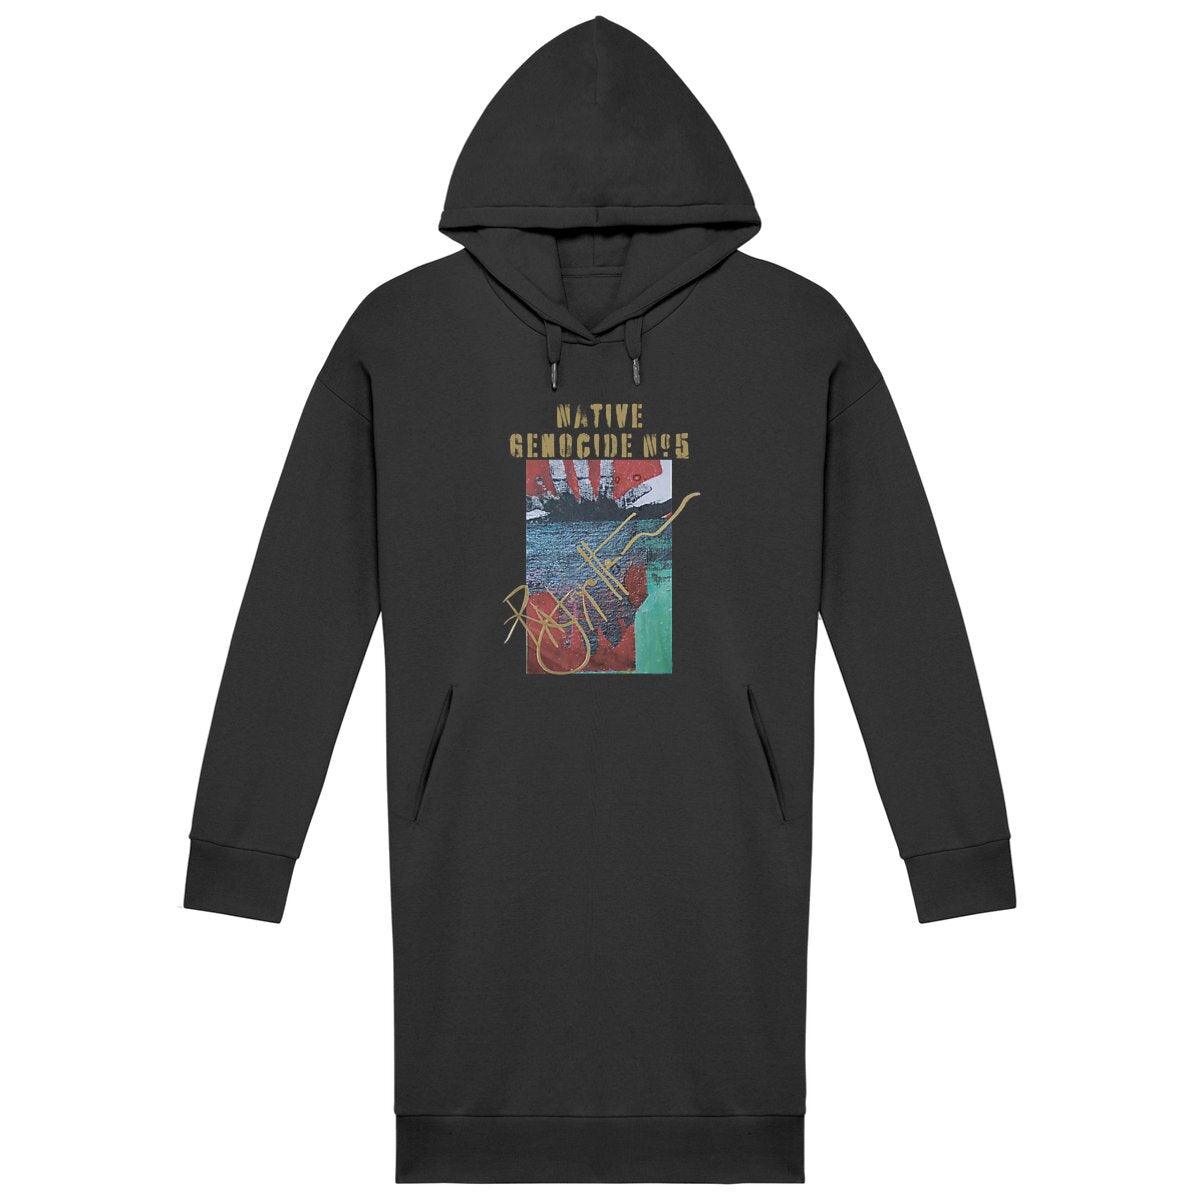 Native Genocide #5 Premium Comfy Fit Hoodie Dress, made from organic cotton and recycled polyester, designed by Tree of Life Art, combines comfort with a commitment to sustainability.